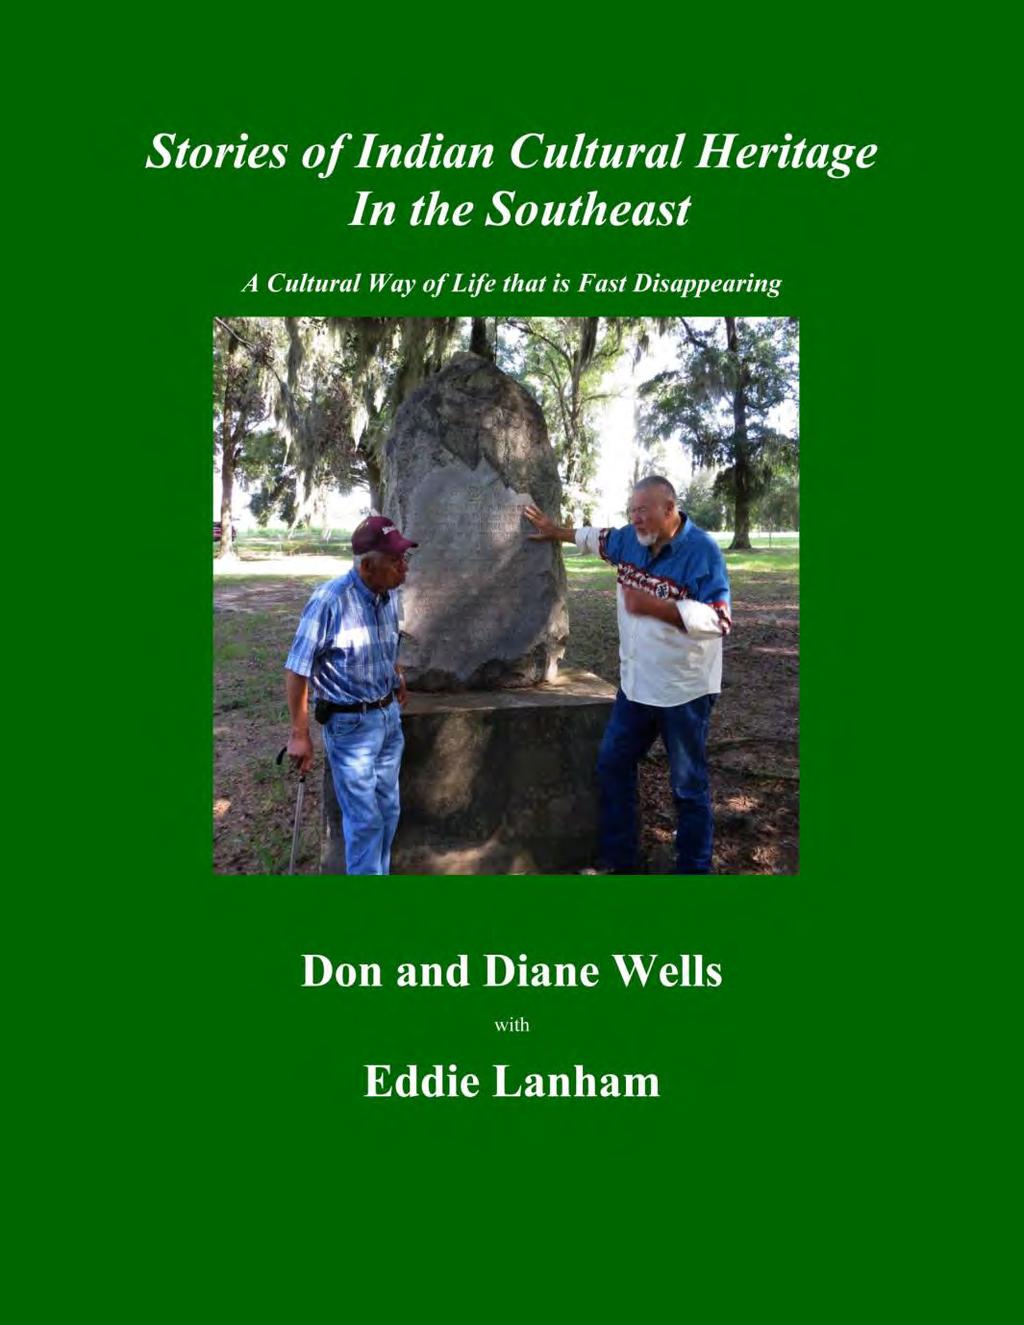 New Book for 2016 Our new book, Stories of Indian Culture In the Southeast is completed and undergoing editing at